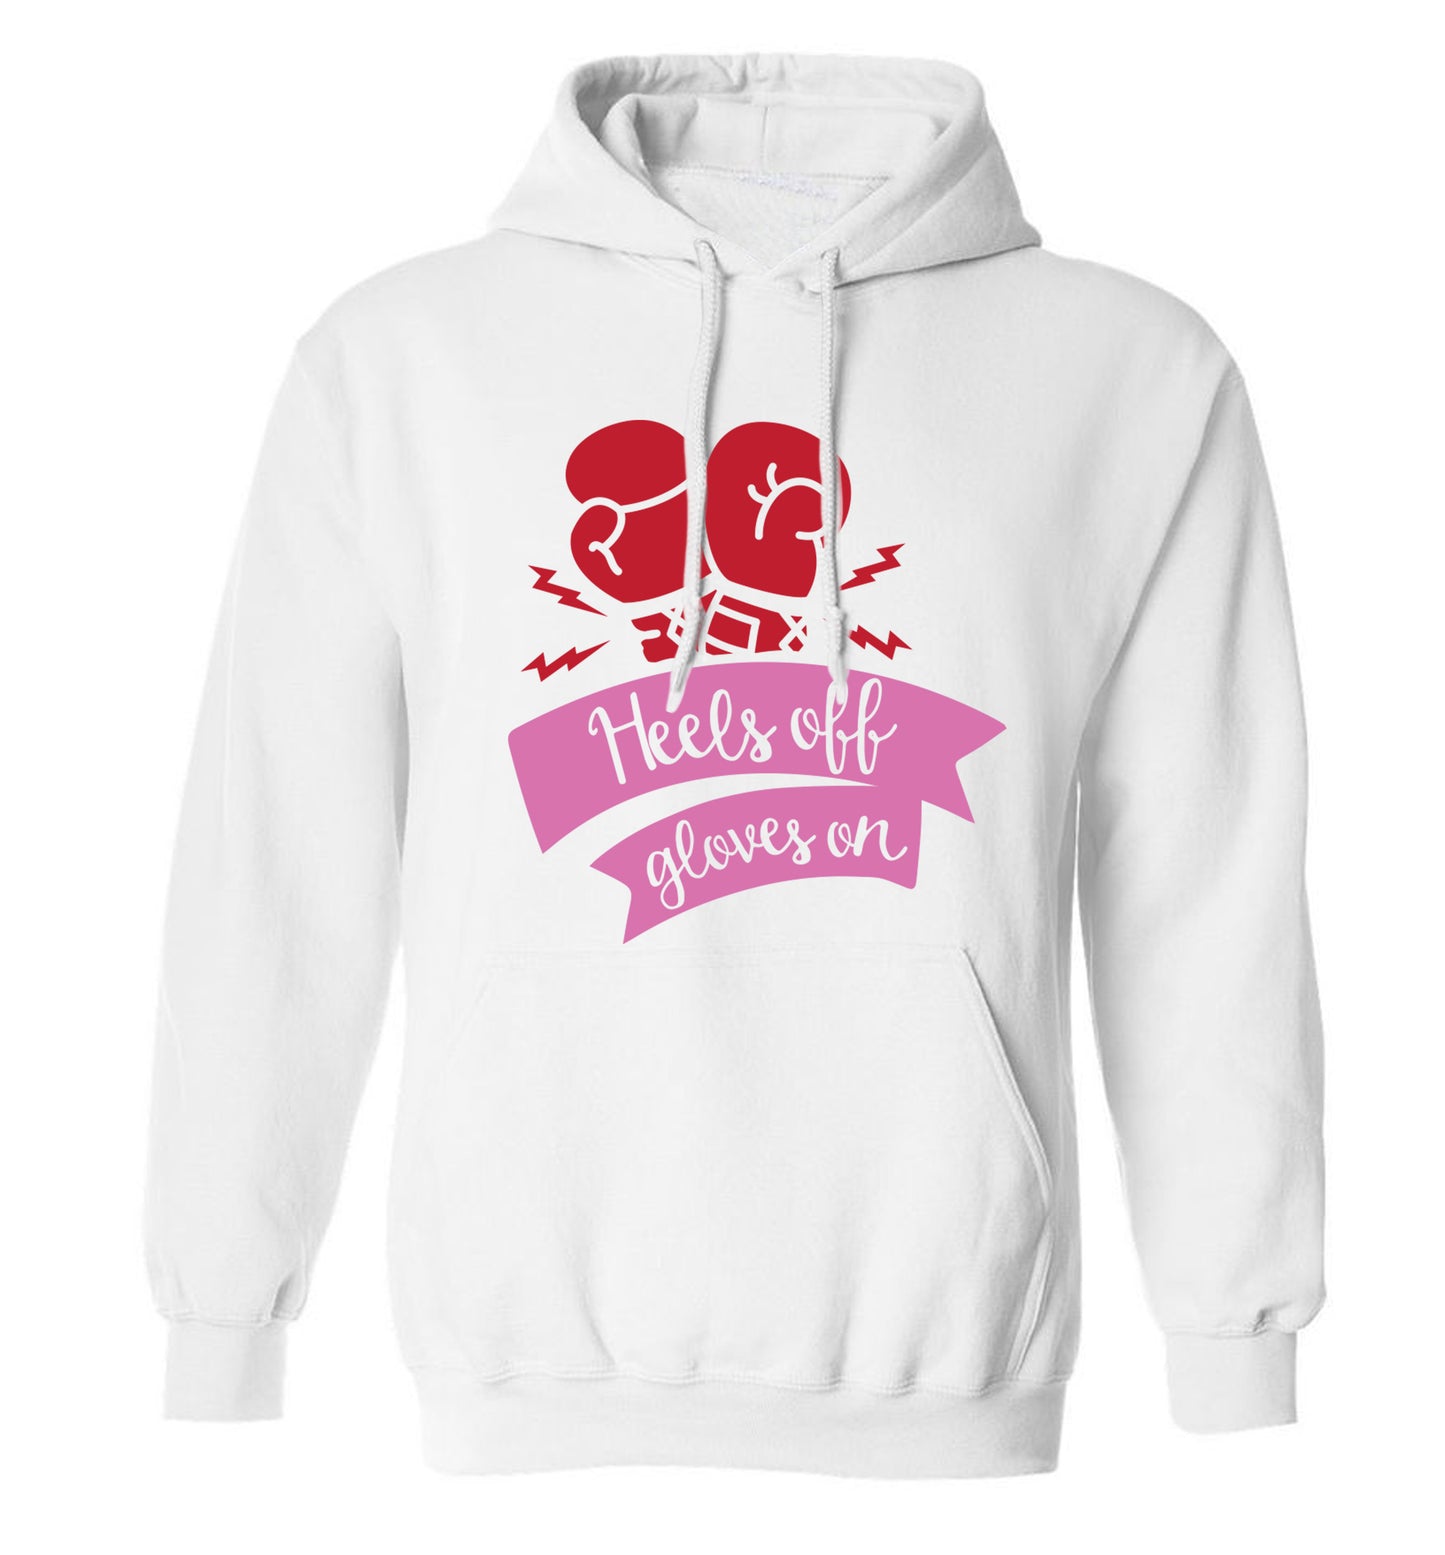 Heels off gloves on adults unisex white hoodie 2XL